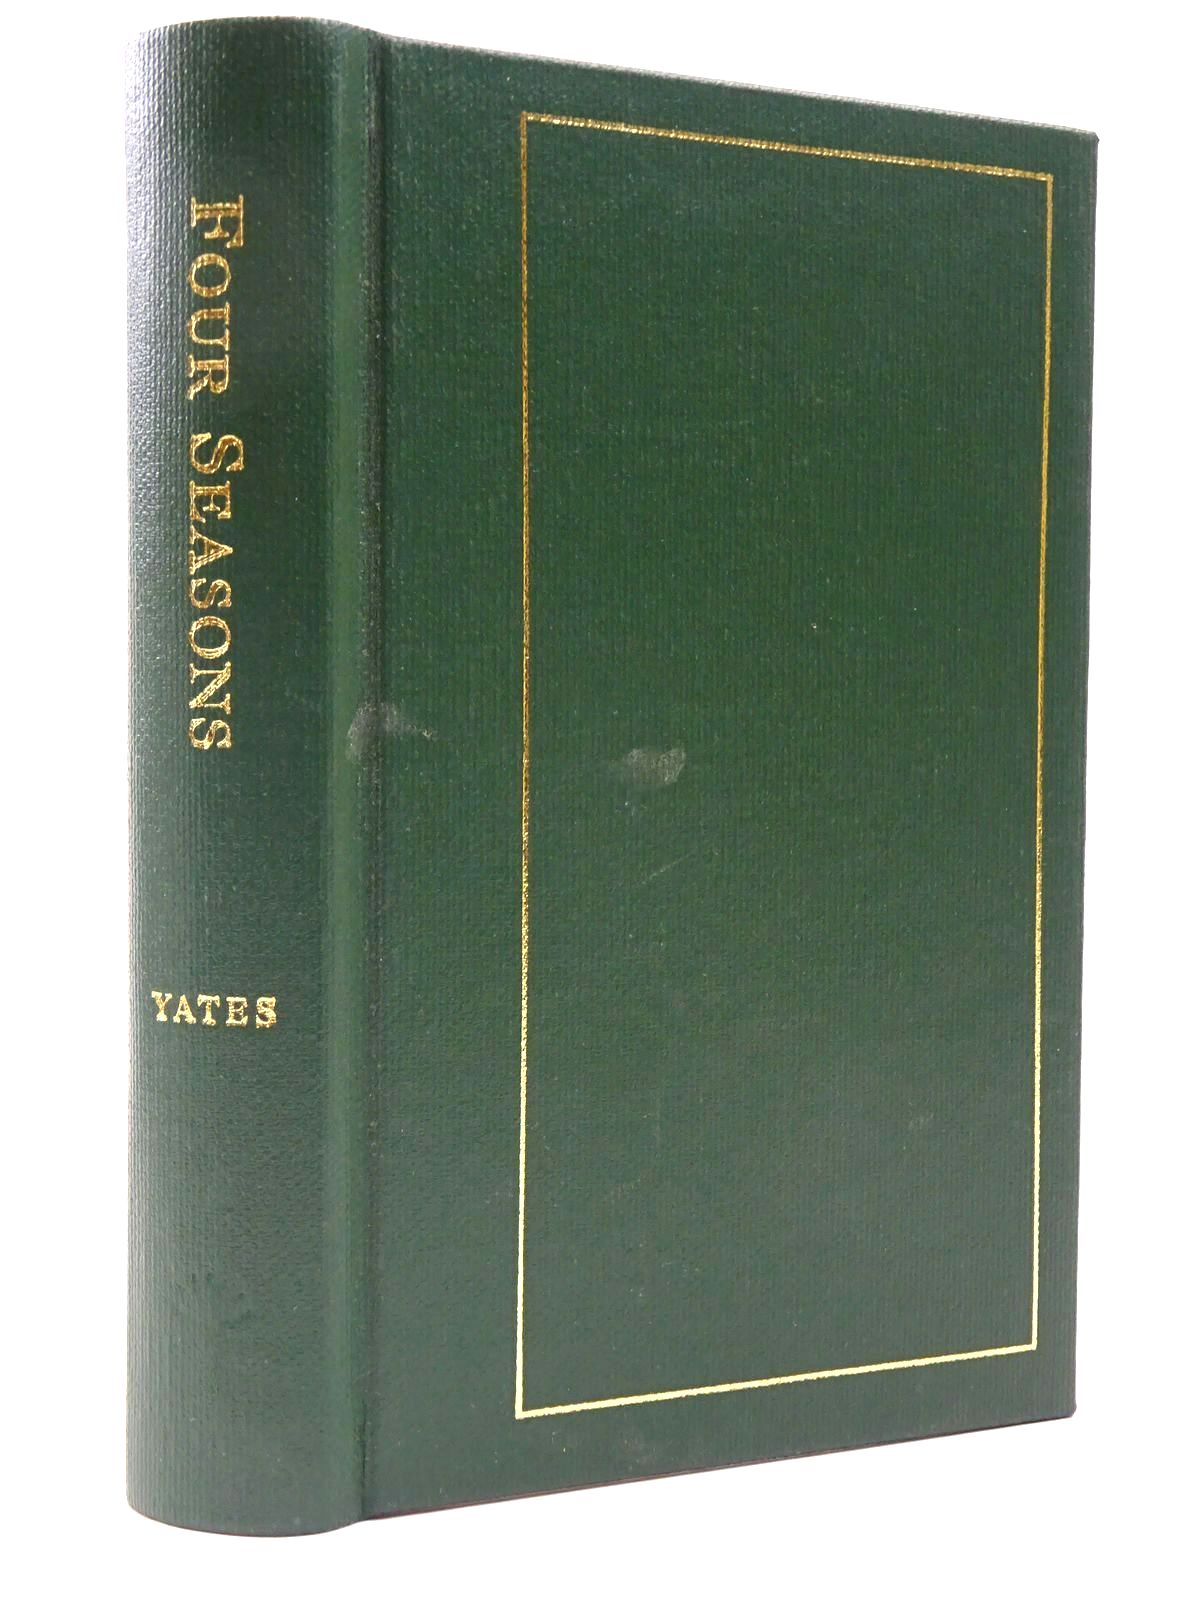 Photo of FOUR SEASONS BEING THE FISHING DIARIES OF CHRISTOPHER YATES JUNE 1977 - MARCH 1981 written by Yates, Christopher published by The Medlar Press (STOCK CODE: 2129510)  for sale by Stella & Rose's Books